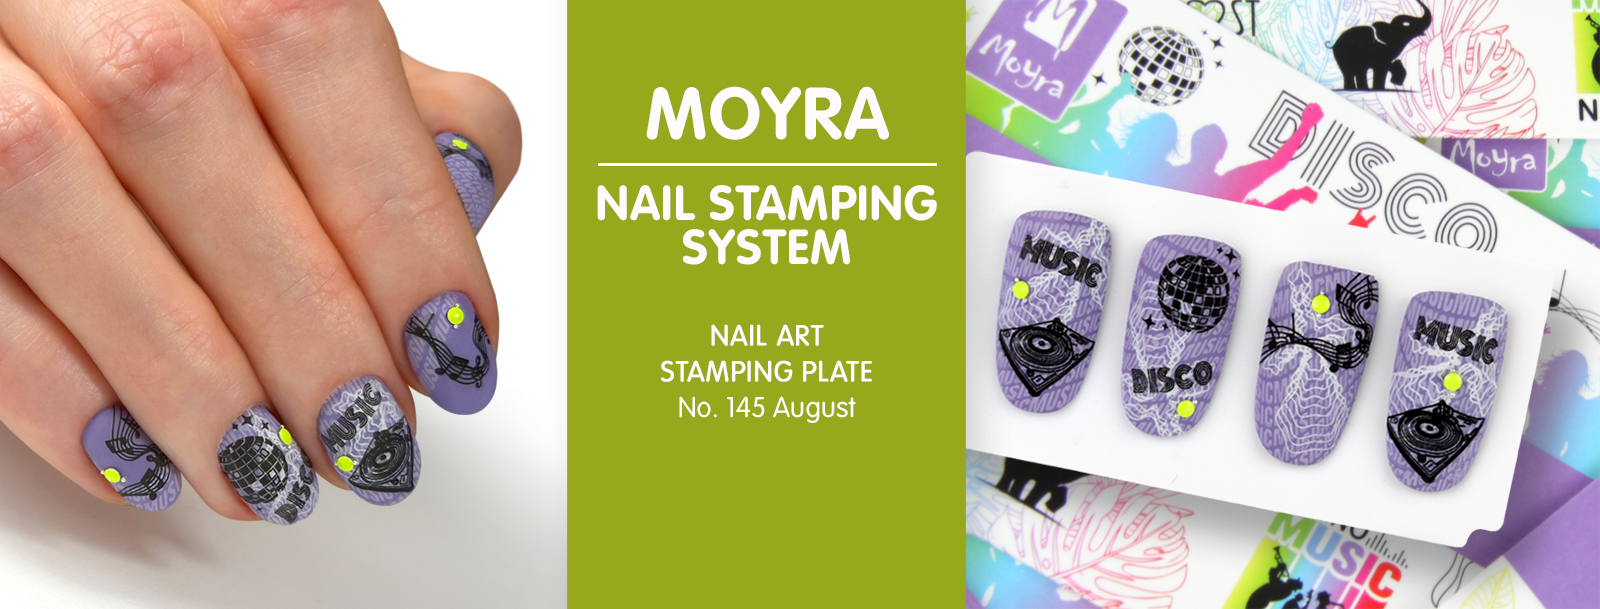 Moyra Stamping plate 145 August